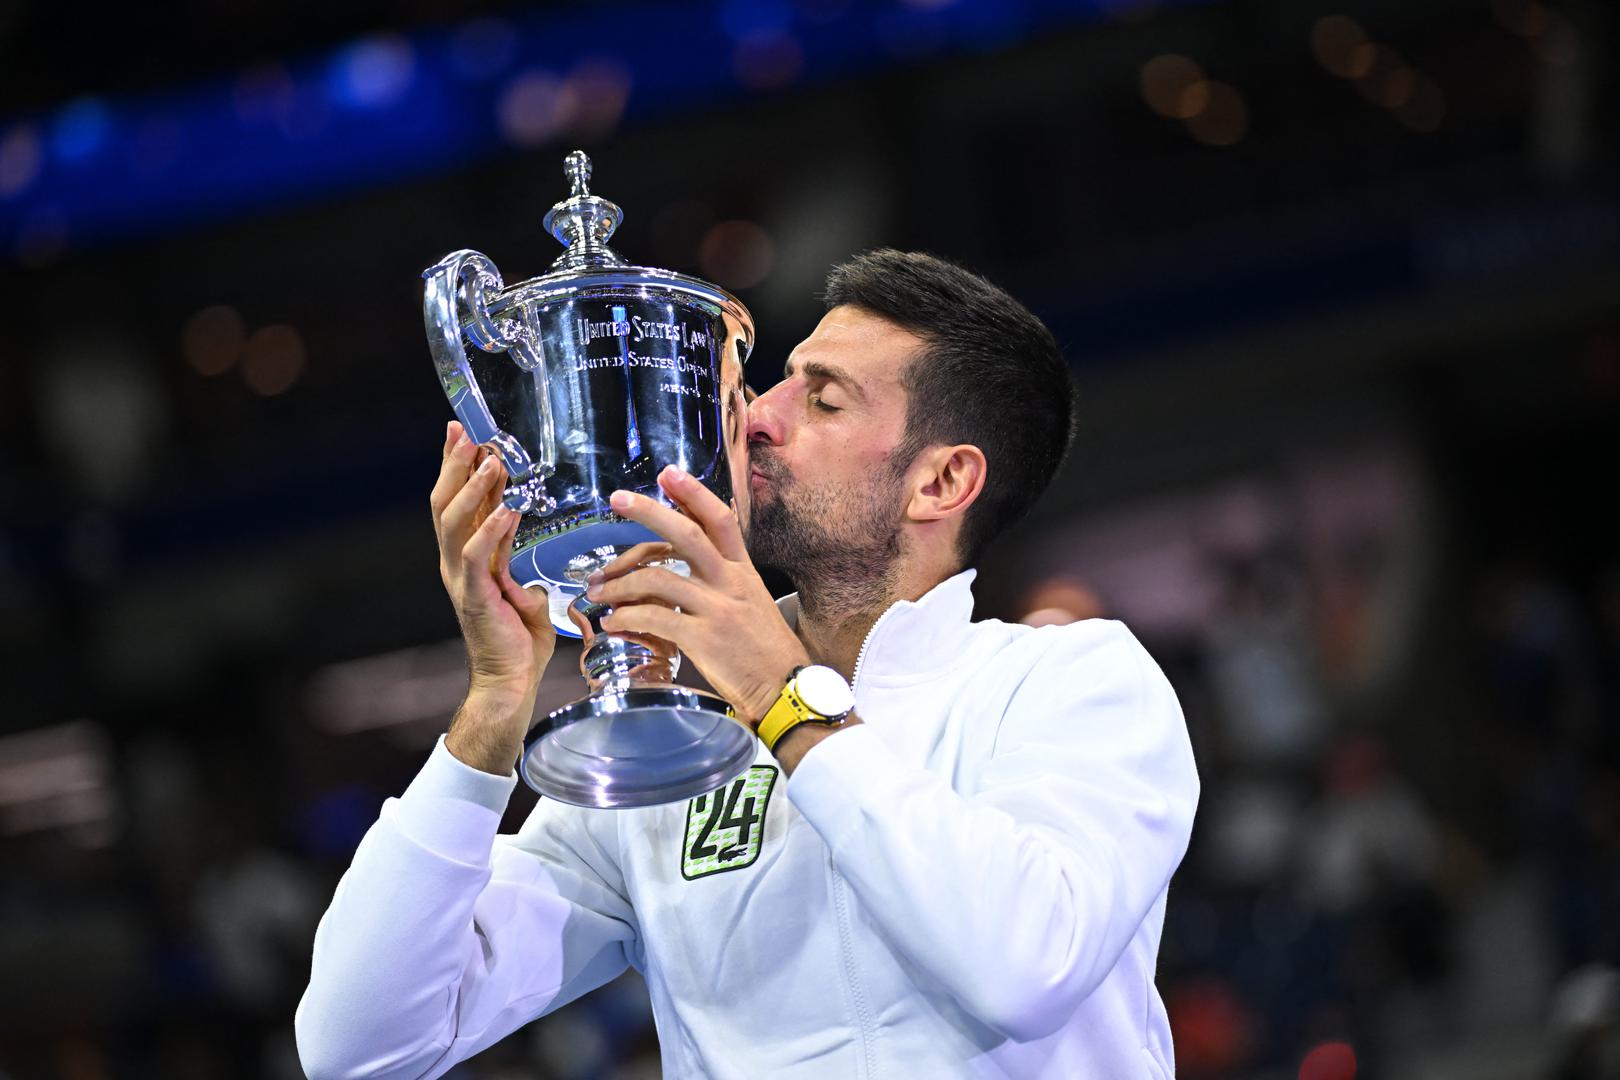 Novak Djokovic (SRB) wins his 24th slam at the 2023 US Open at Billie Jean National Tennis Center in New York City, NY, USA, on September 10, 2023. Photo by Corinne Dubreuil/ABACAPRESS.COM Photo: Dubreuil Corinne/ABACA/ABACA